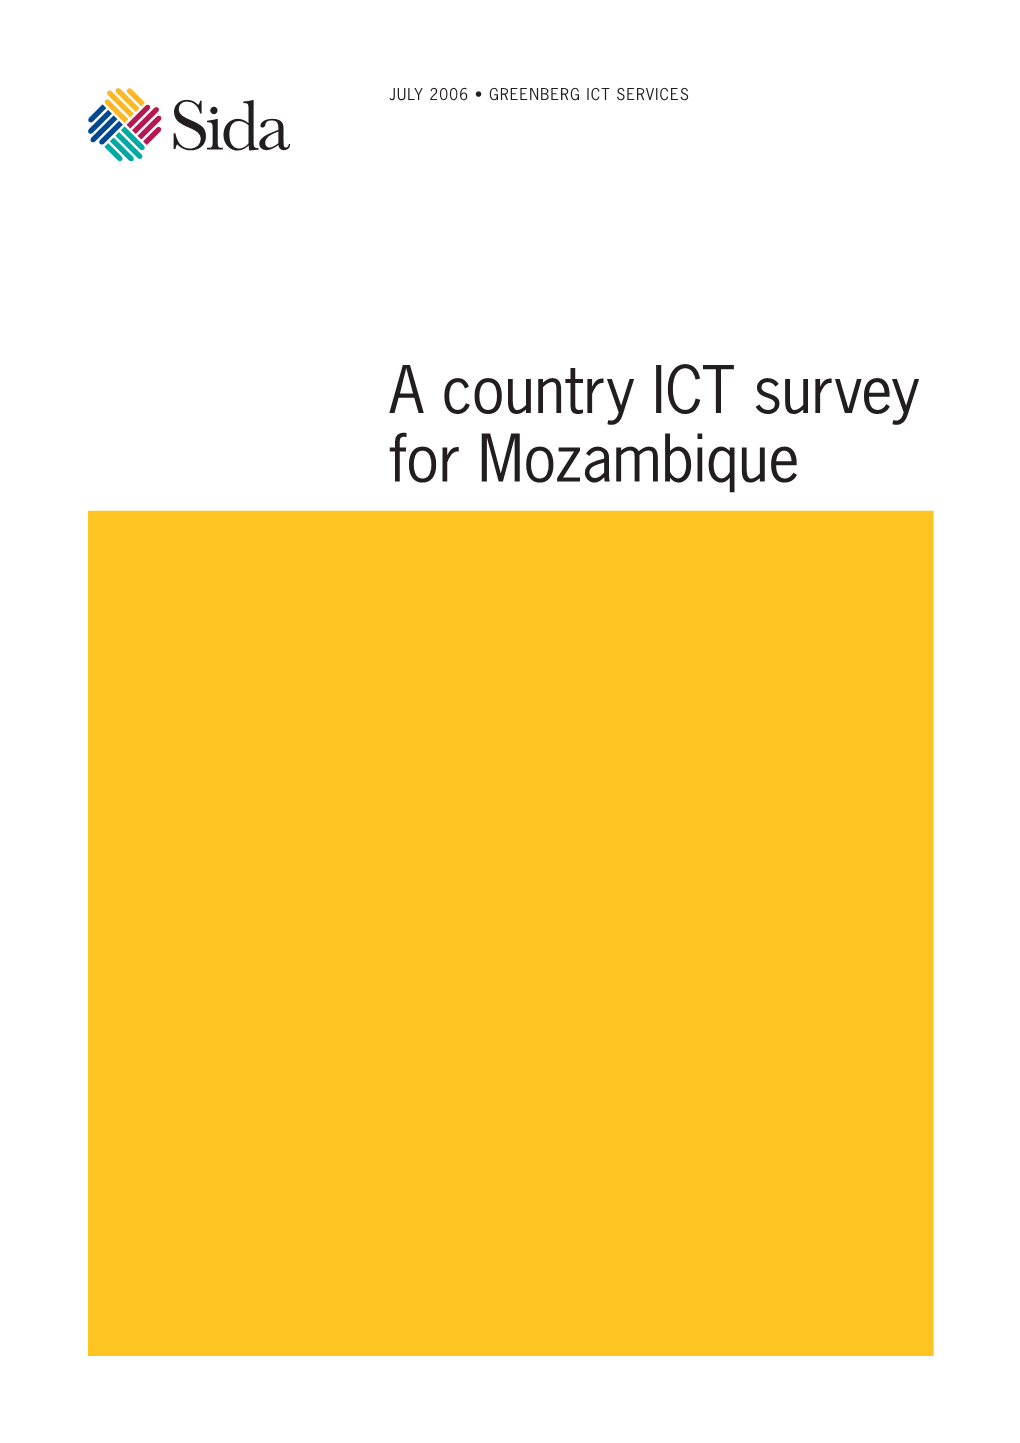 A Country ICT Survey for Mozambique